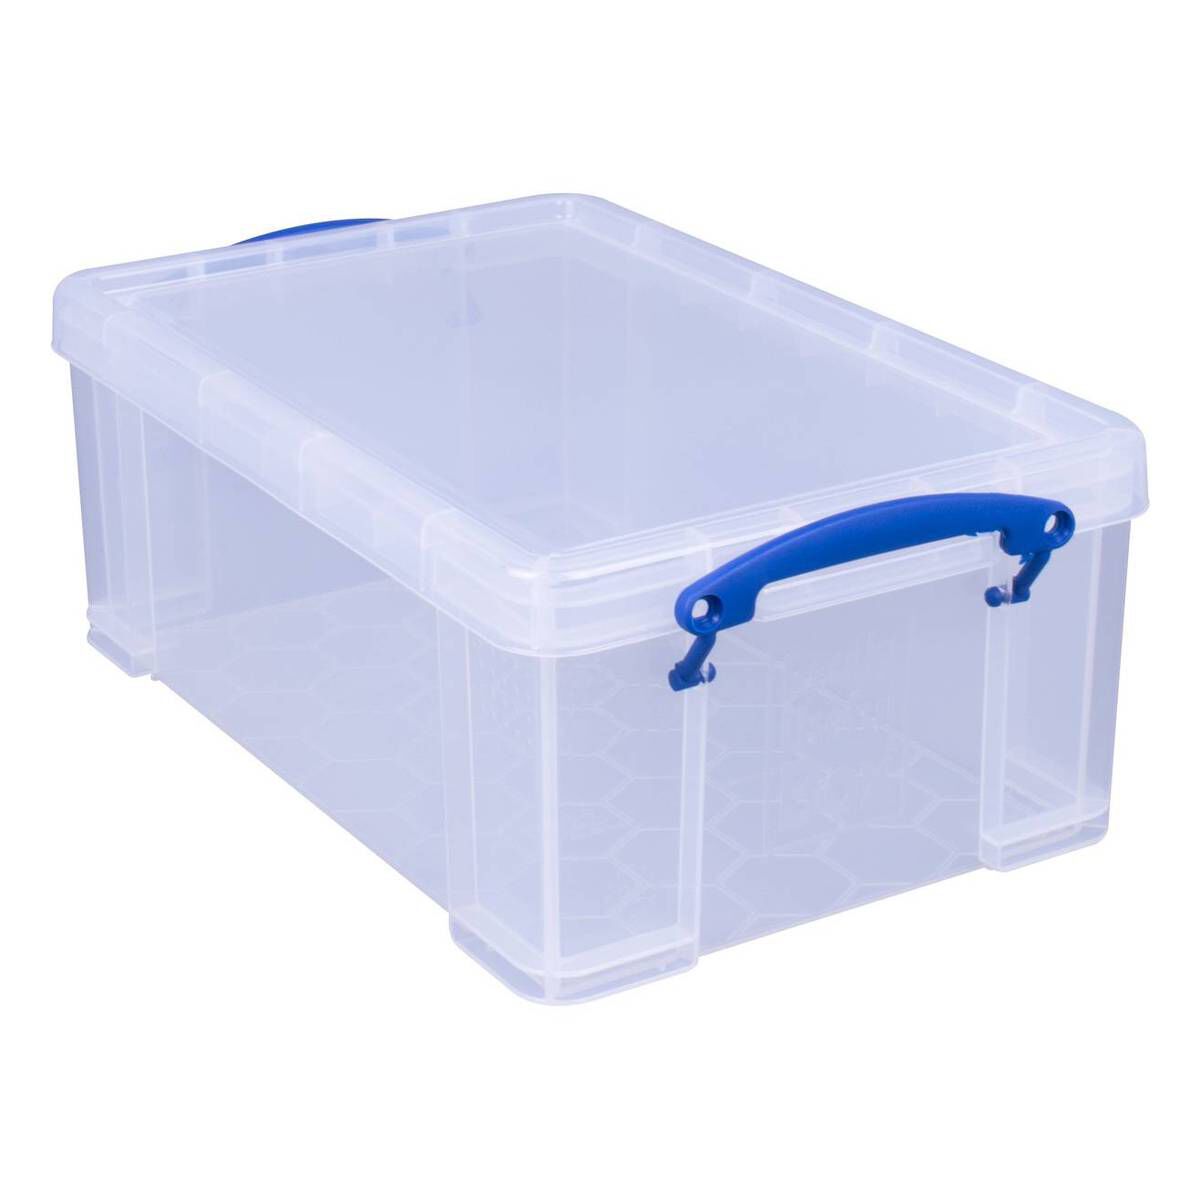 10 x 13 x 5 Inches Blue 5-Pack 1 Letter Size Deep Storage Tray with Lid 